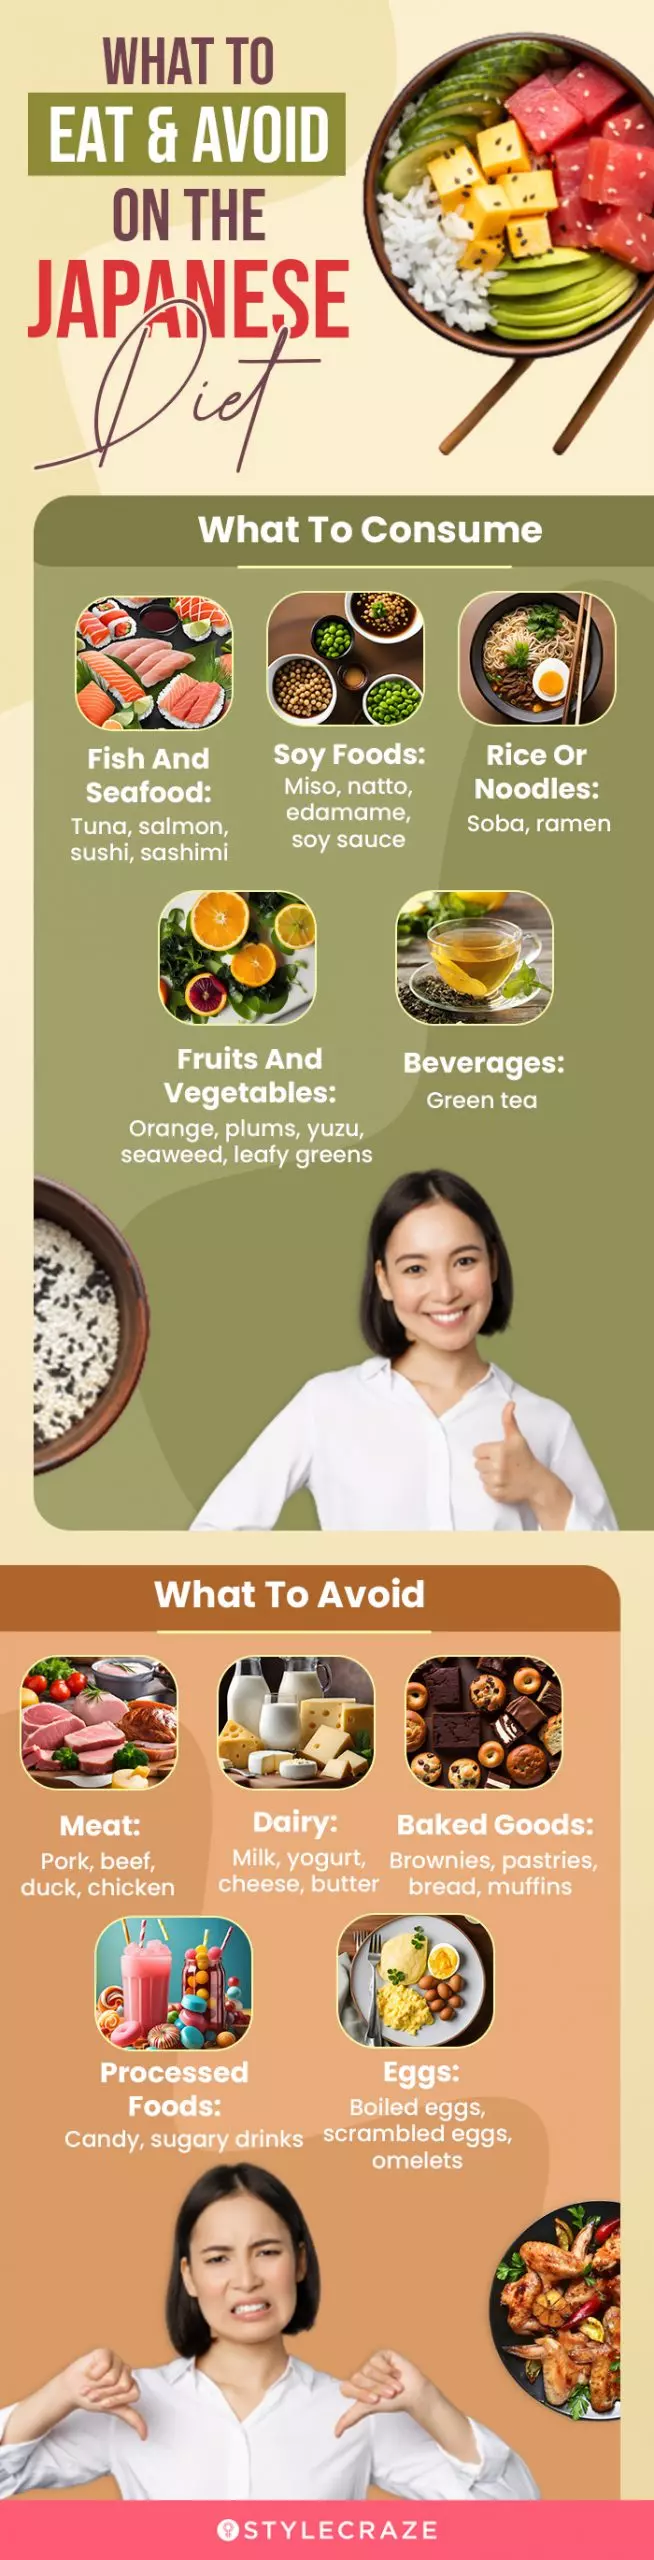 what to eat & avoid on the japanese diet (infographic)